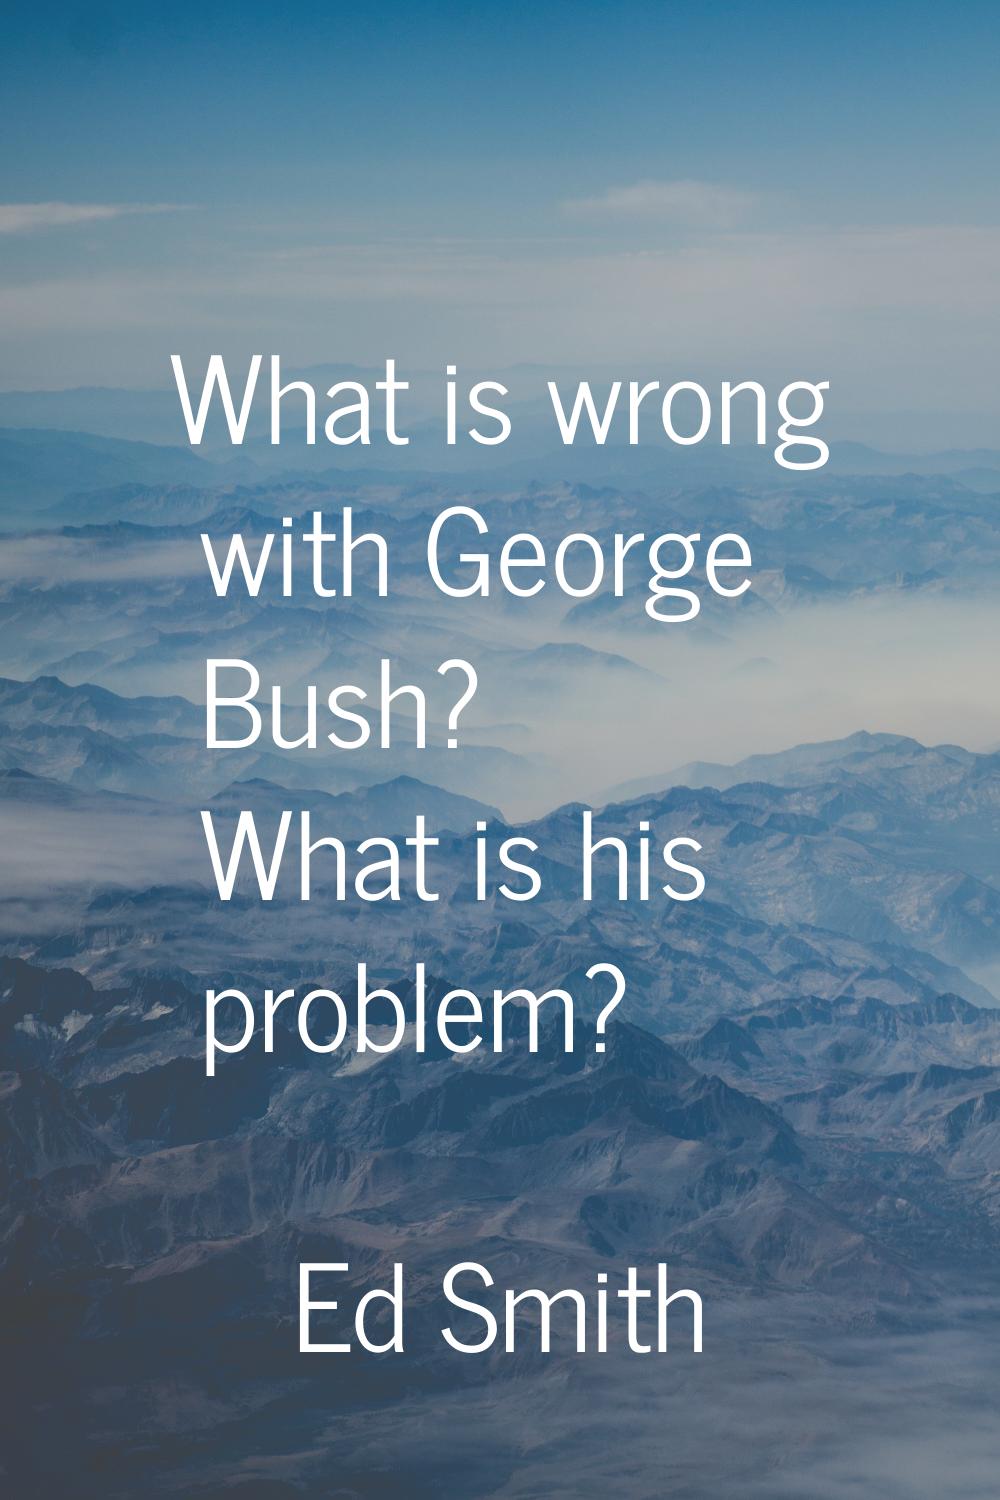 What is wrong with George Bush? What is his problem?